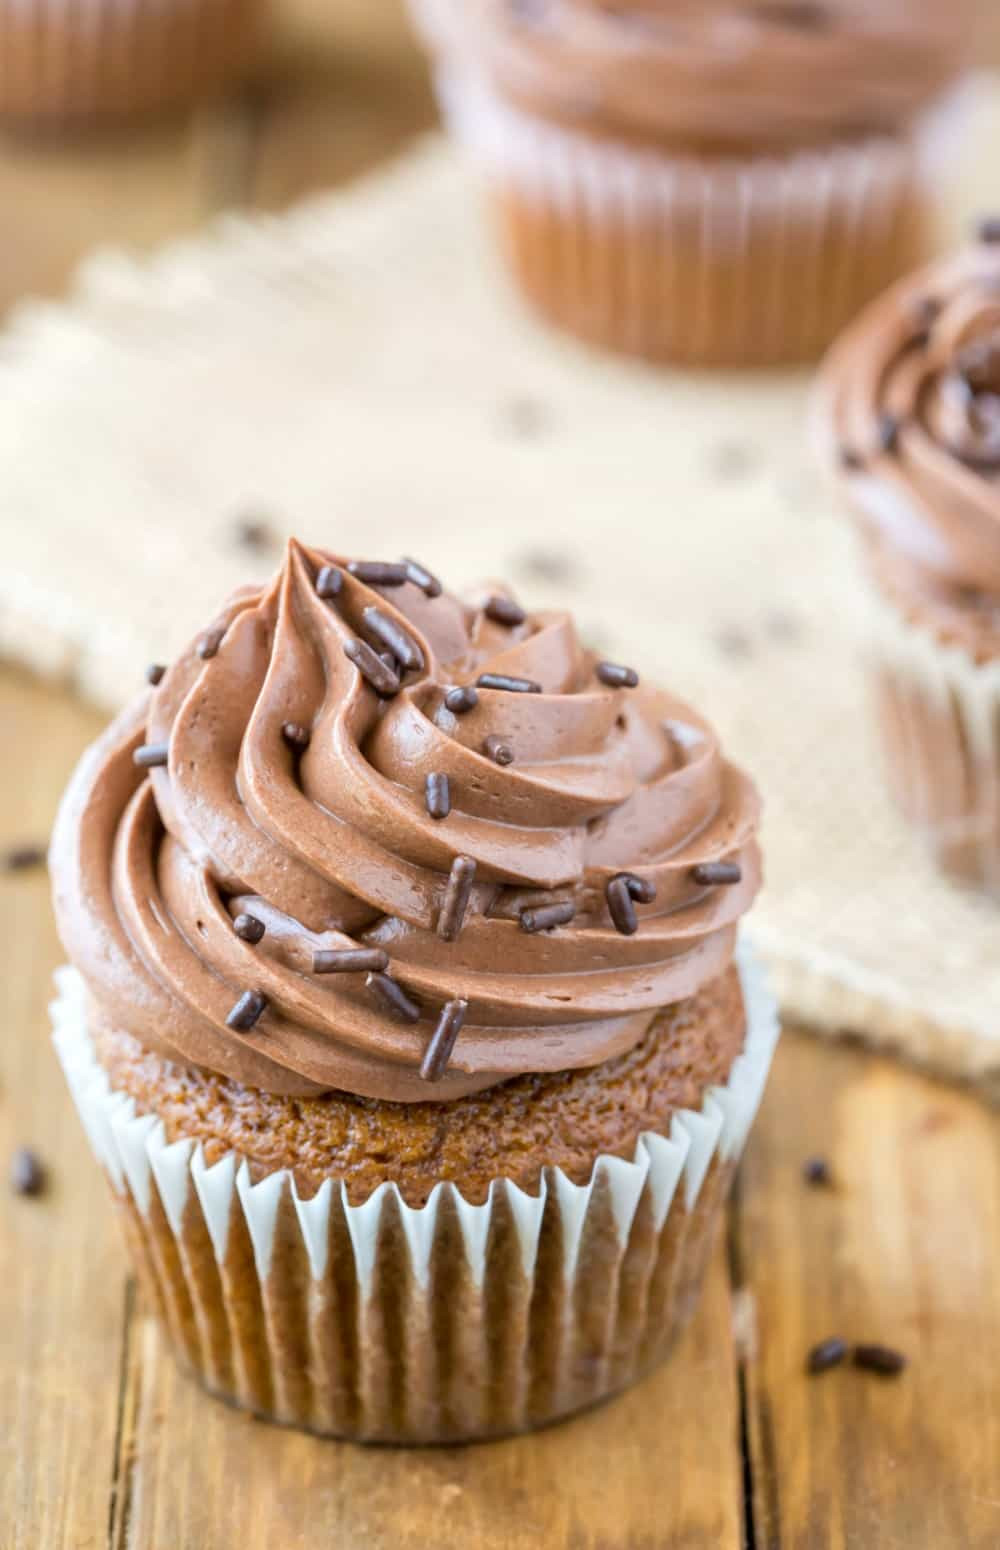 Chocolate Frosting Recipes
 Chocolate Cream Cheese Frosting Recipe I Heart Eating